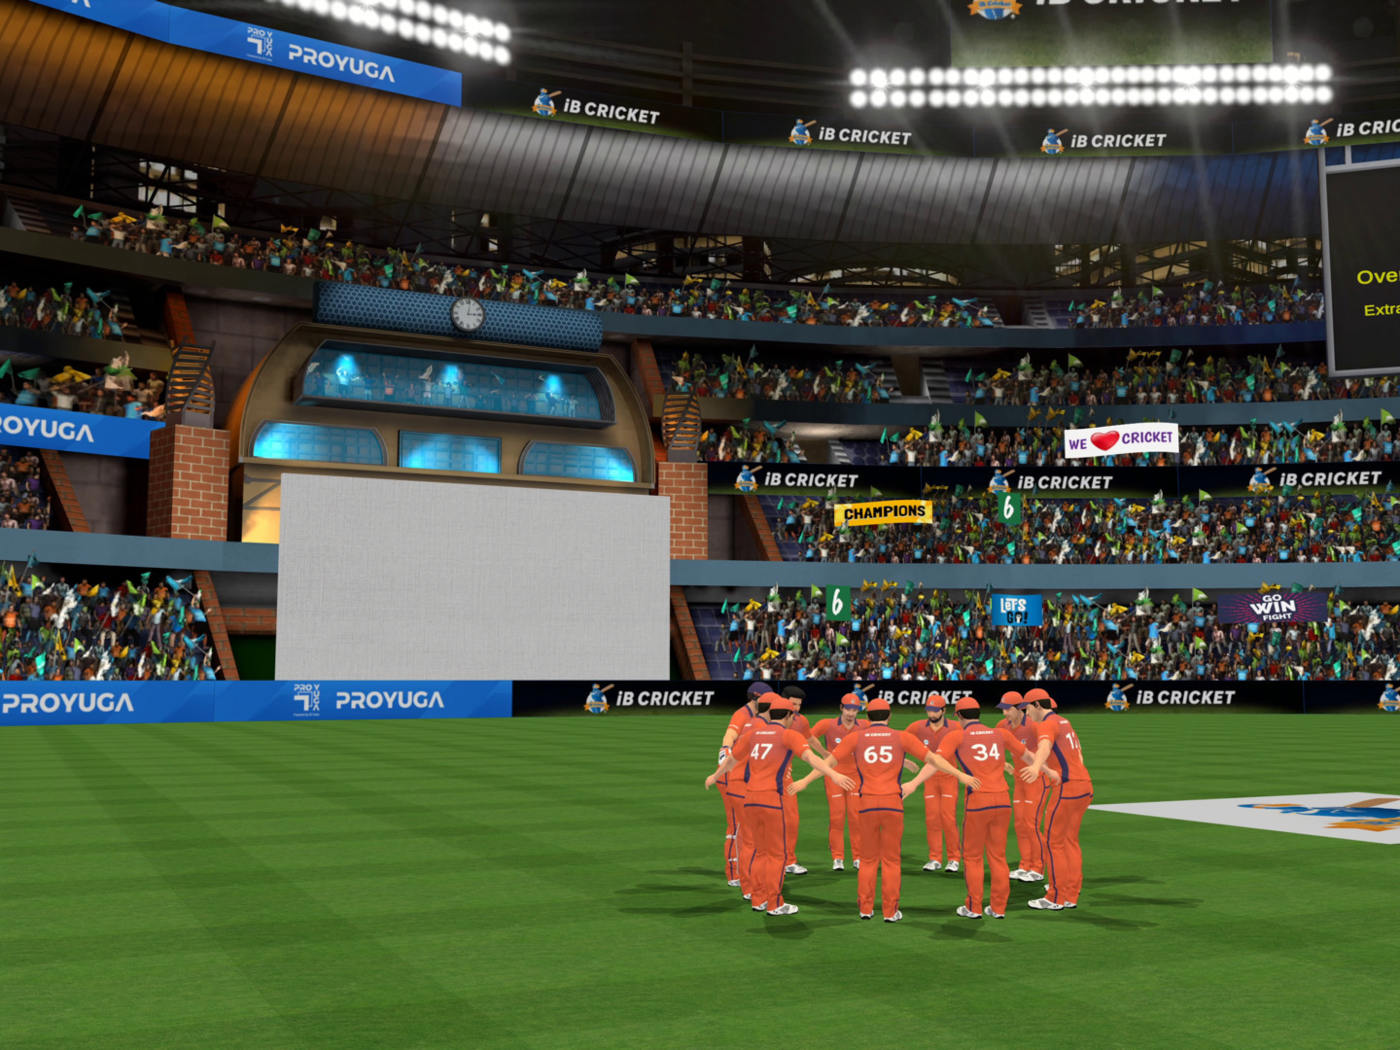 iB Cricket Game Overview  - Hitting Boundaries in the Virtual World